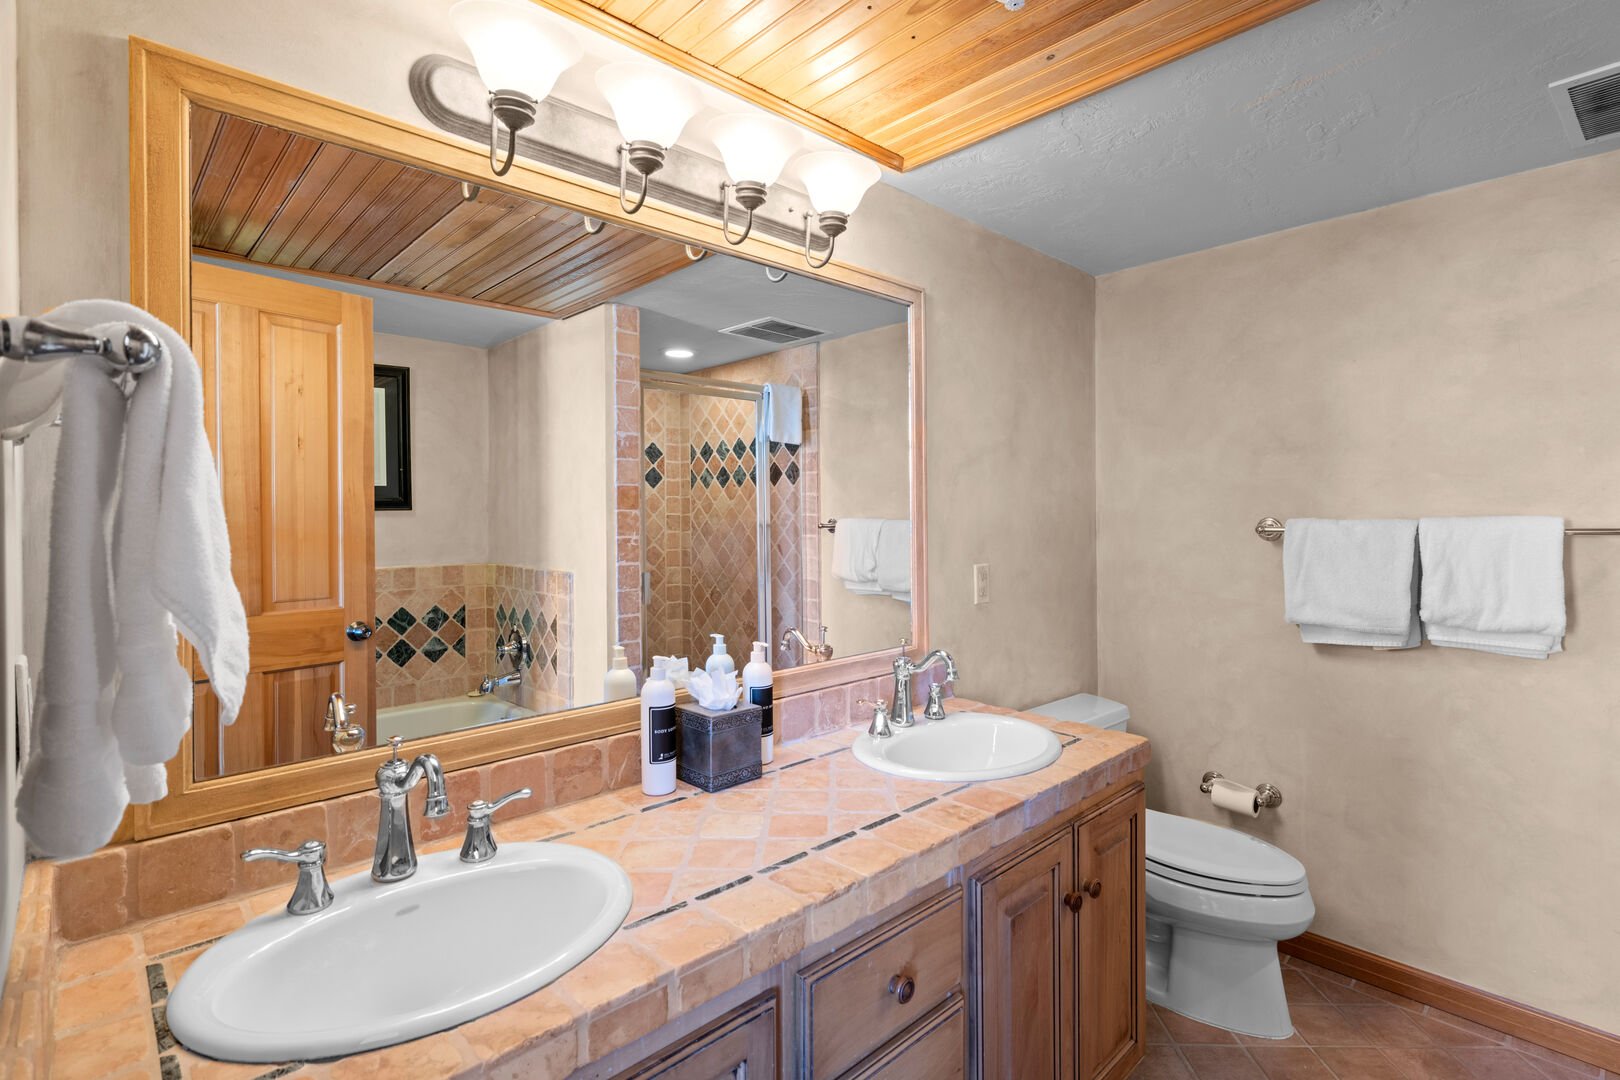 Primary Bathroom with Soaking Tub & Separate Shower